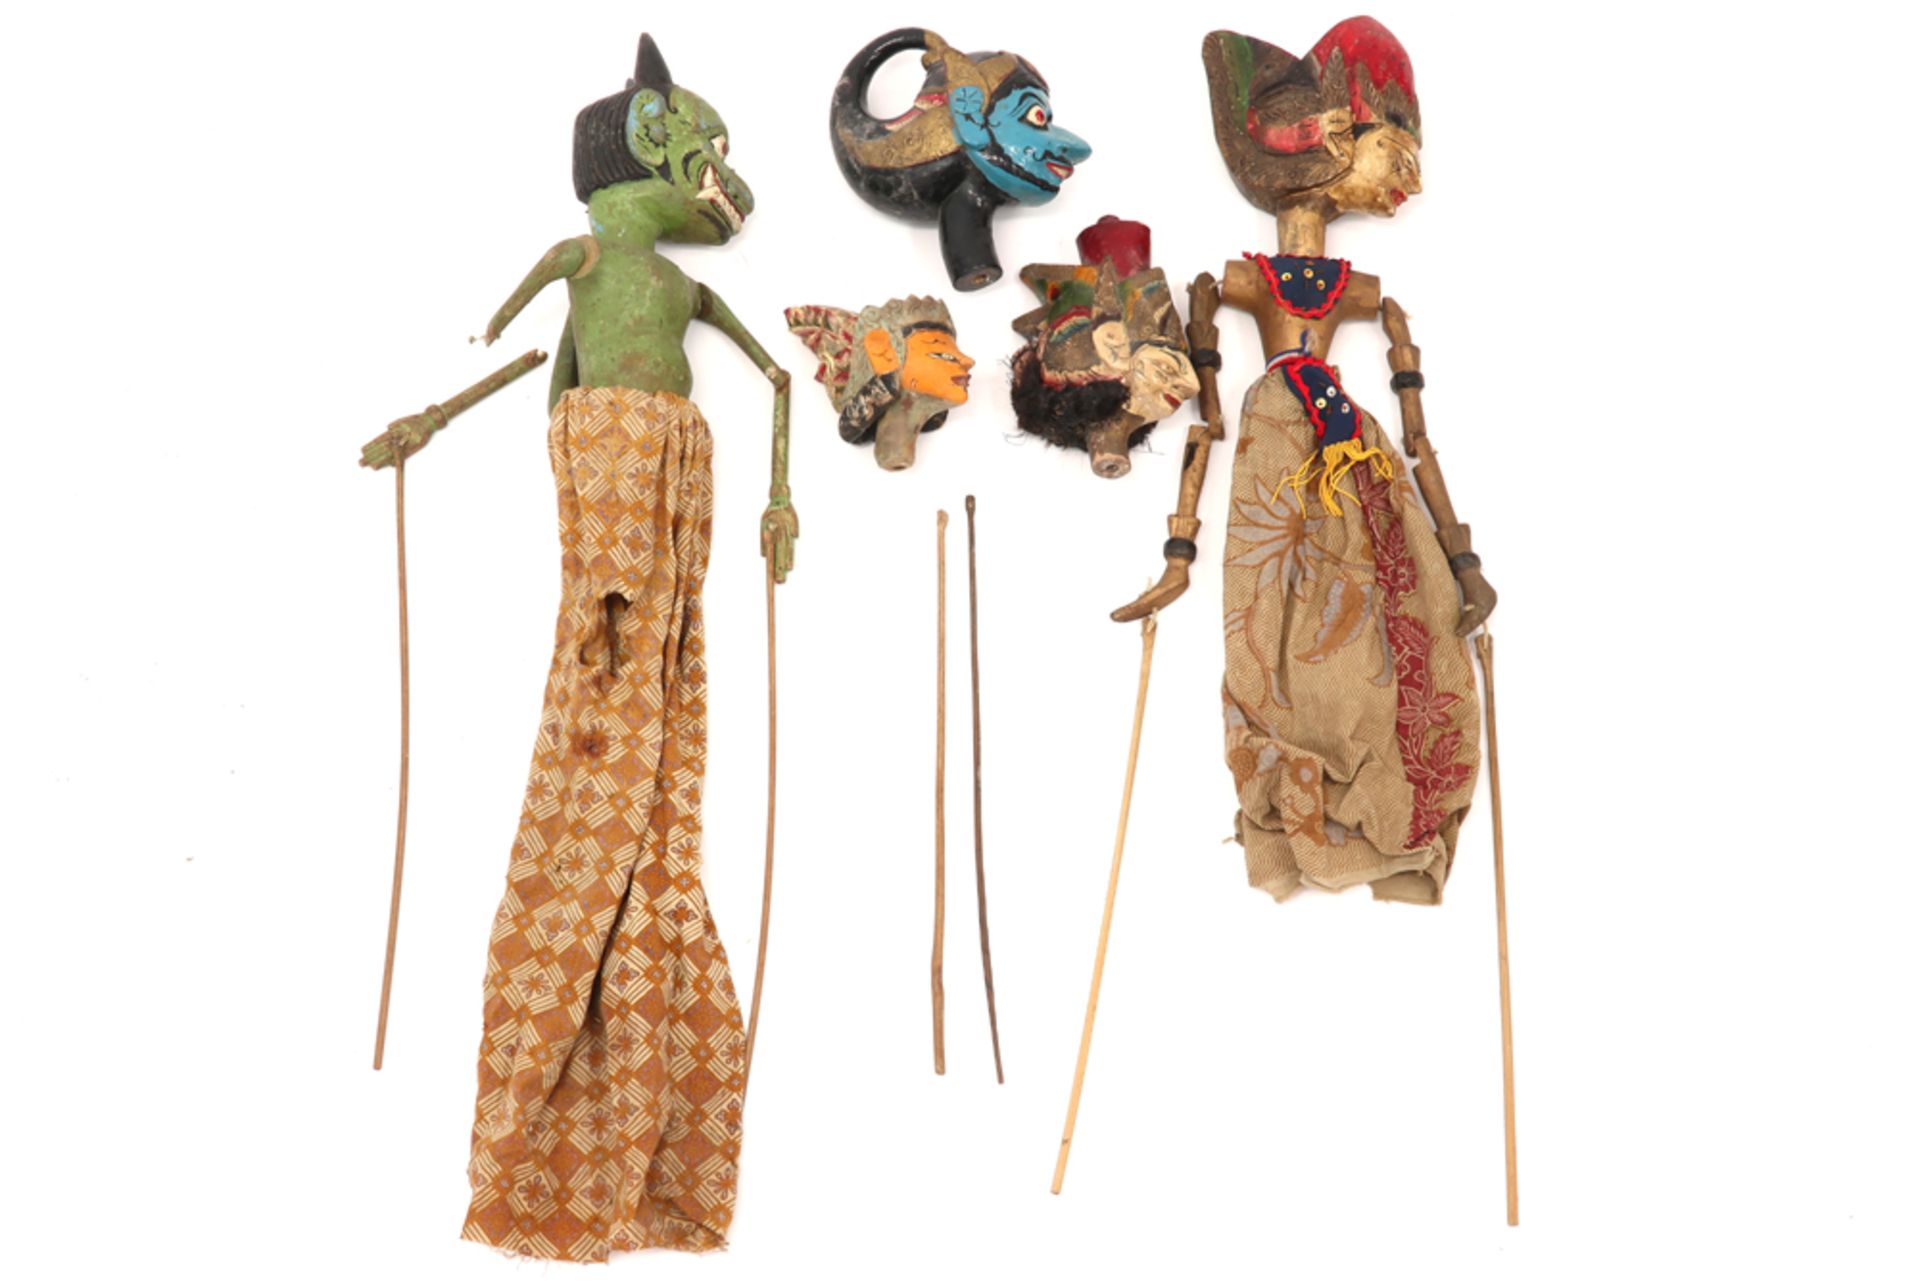 several Indonesian shadow puppets ||Groot lot oude Indonesische schaduwpoppen - Image 4 of 4